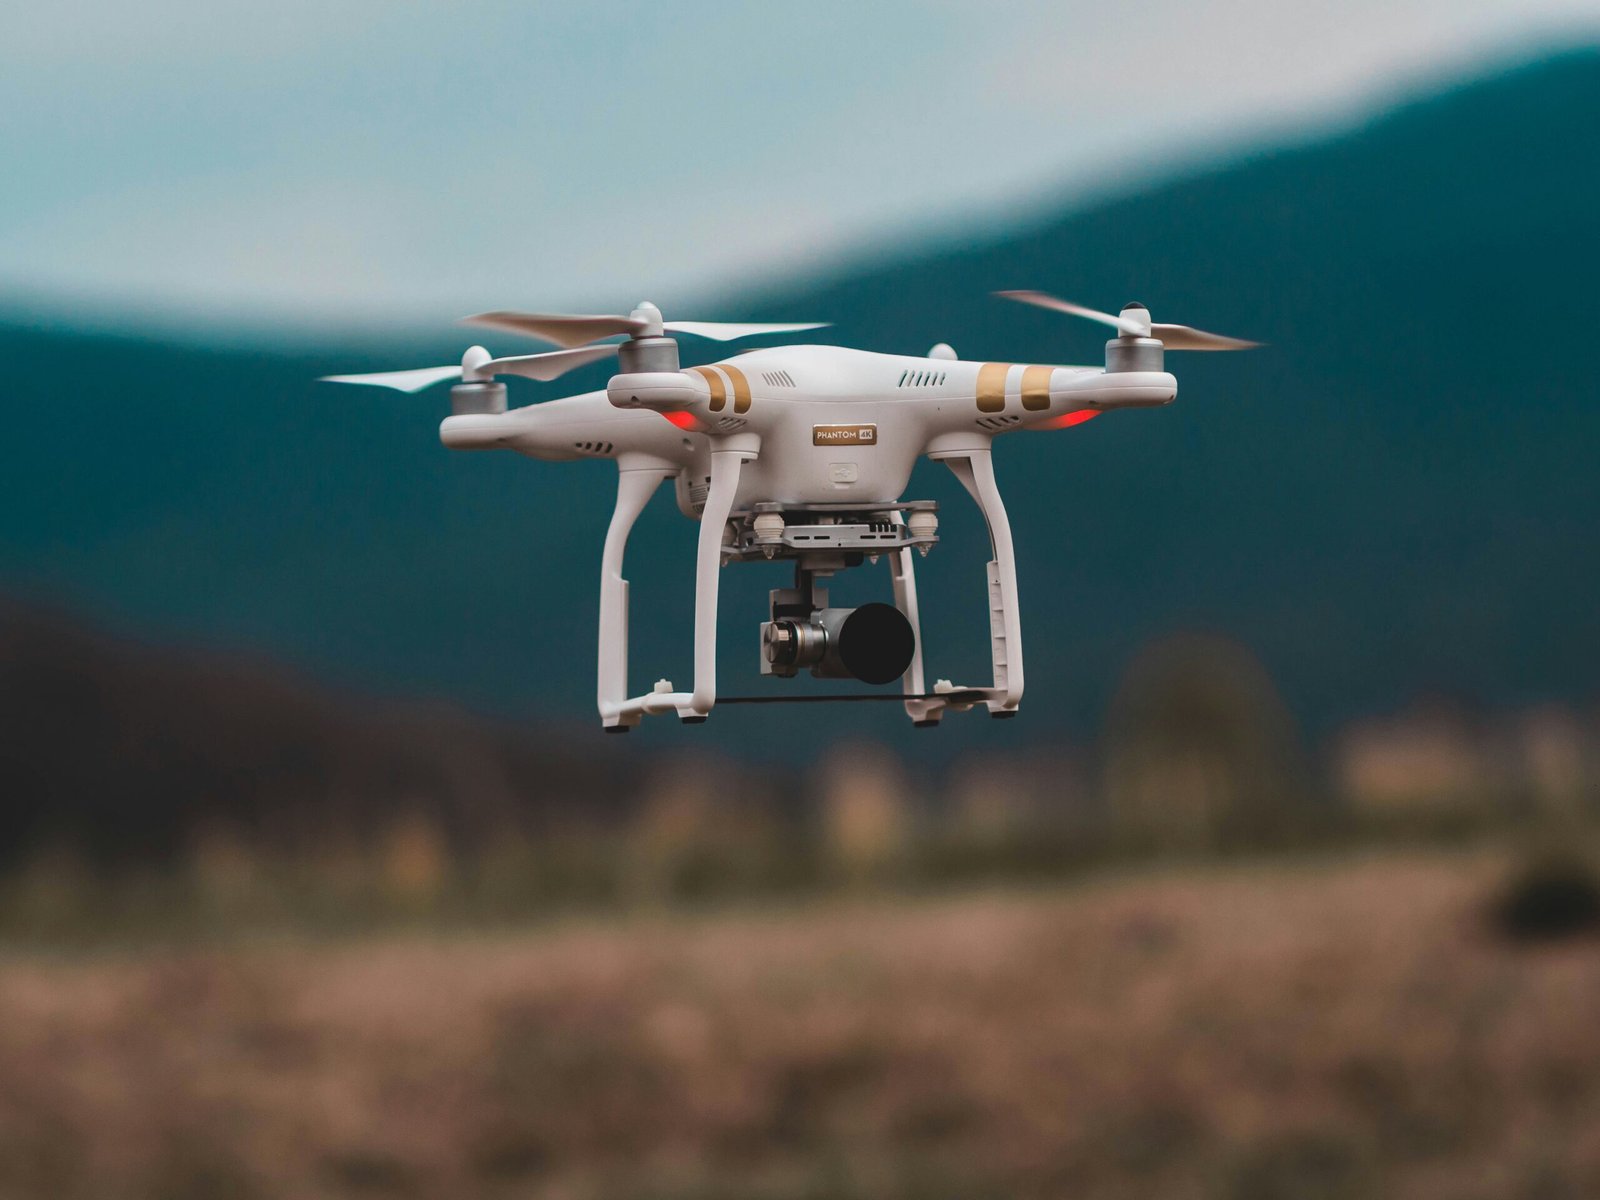 discover high-quality drones for photography, videography, and recreational use. explore a range of drones with advanced features and capabilities for every skill level.